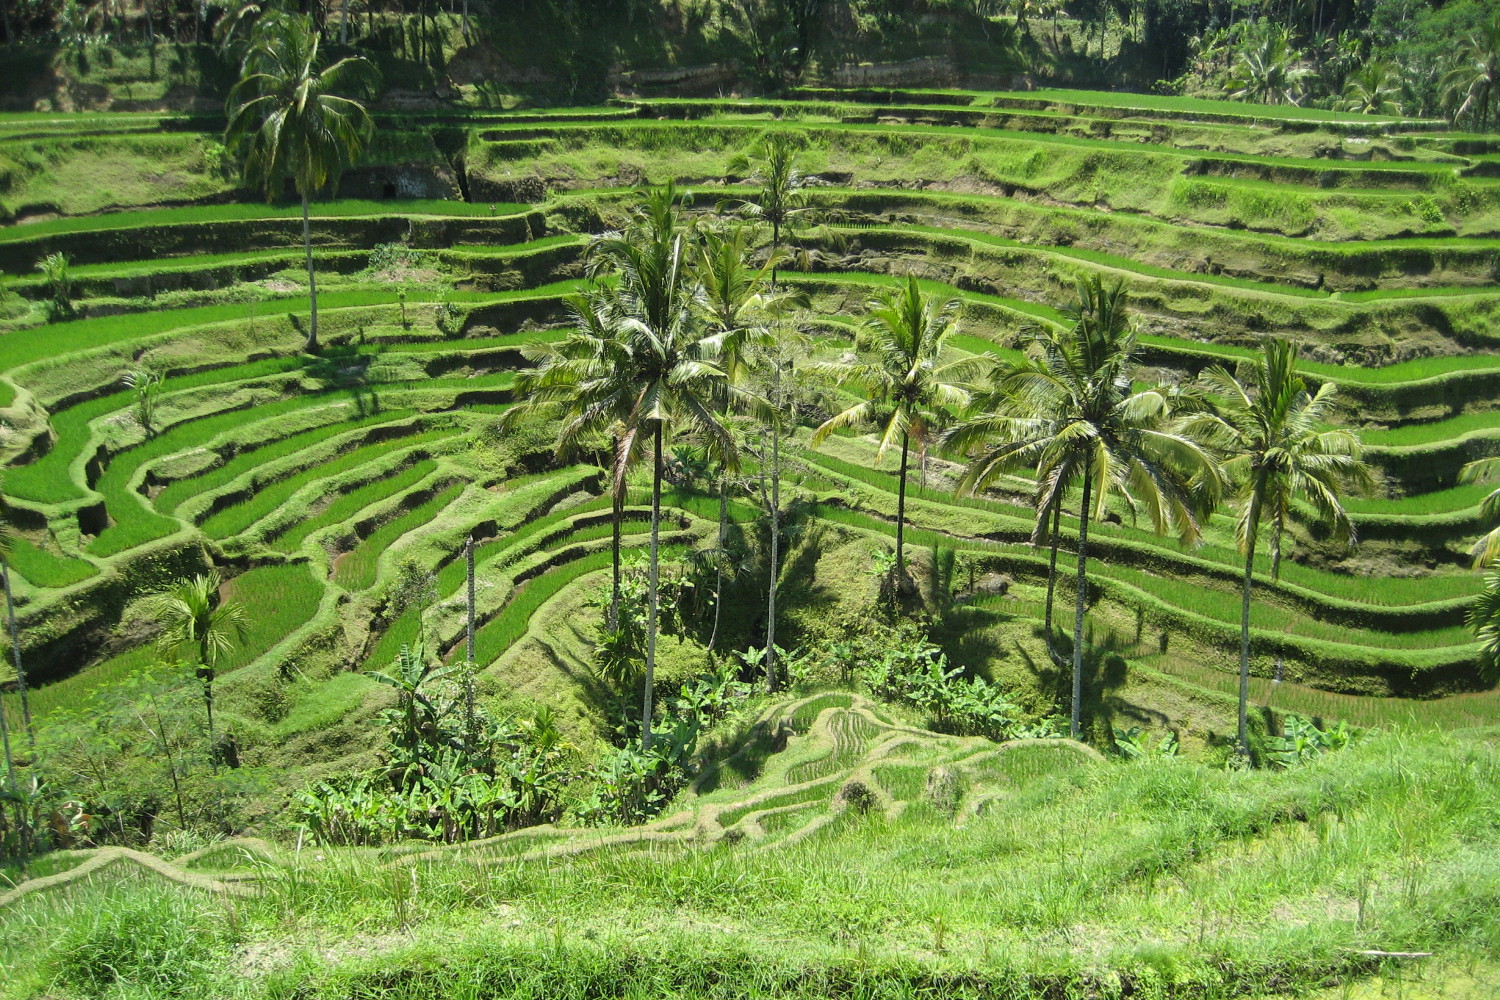 Travel reads lure visitors to Indonesia's dramatic landscapes, such as the rice terraces of Ubud, Bali. Image by Joan Campderros-i-Canas CC BY 2.0